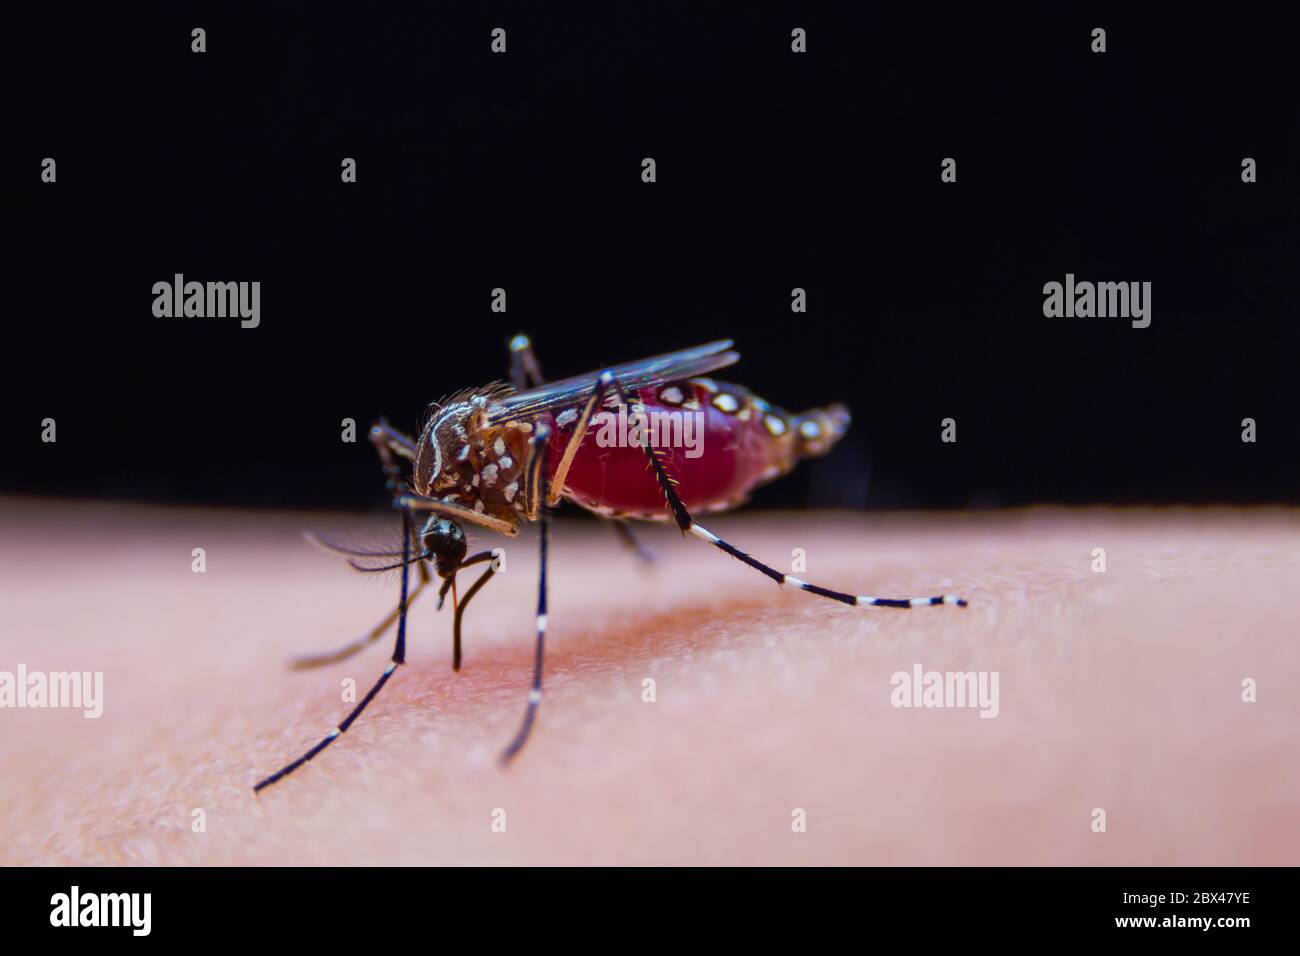 Striped mosquitoes are eating blood on human skin, Dangerous Malaria Infected Mosquito Skin Bite Stock Photo